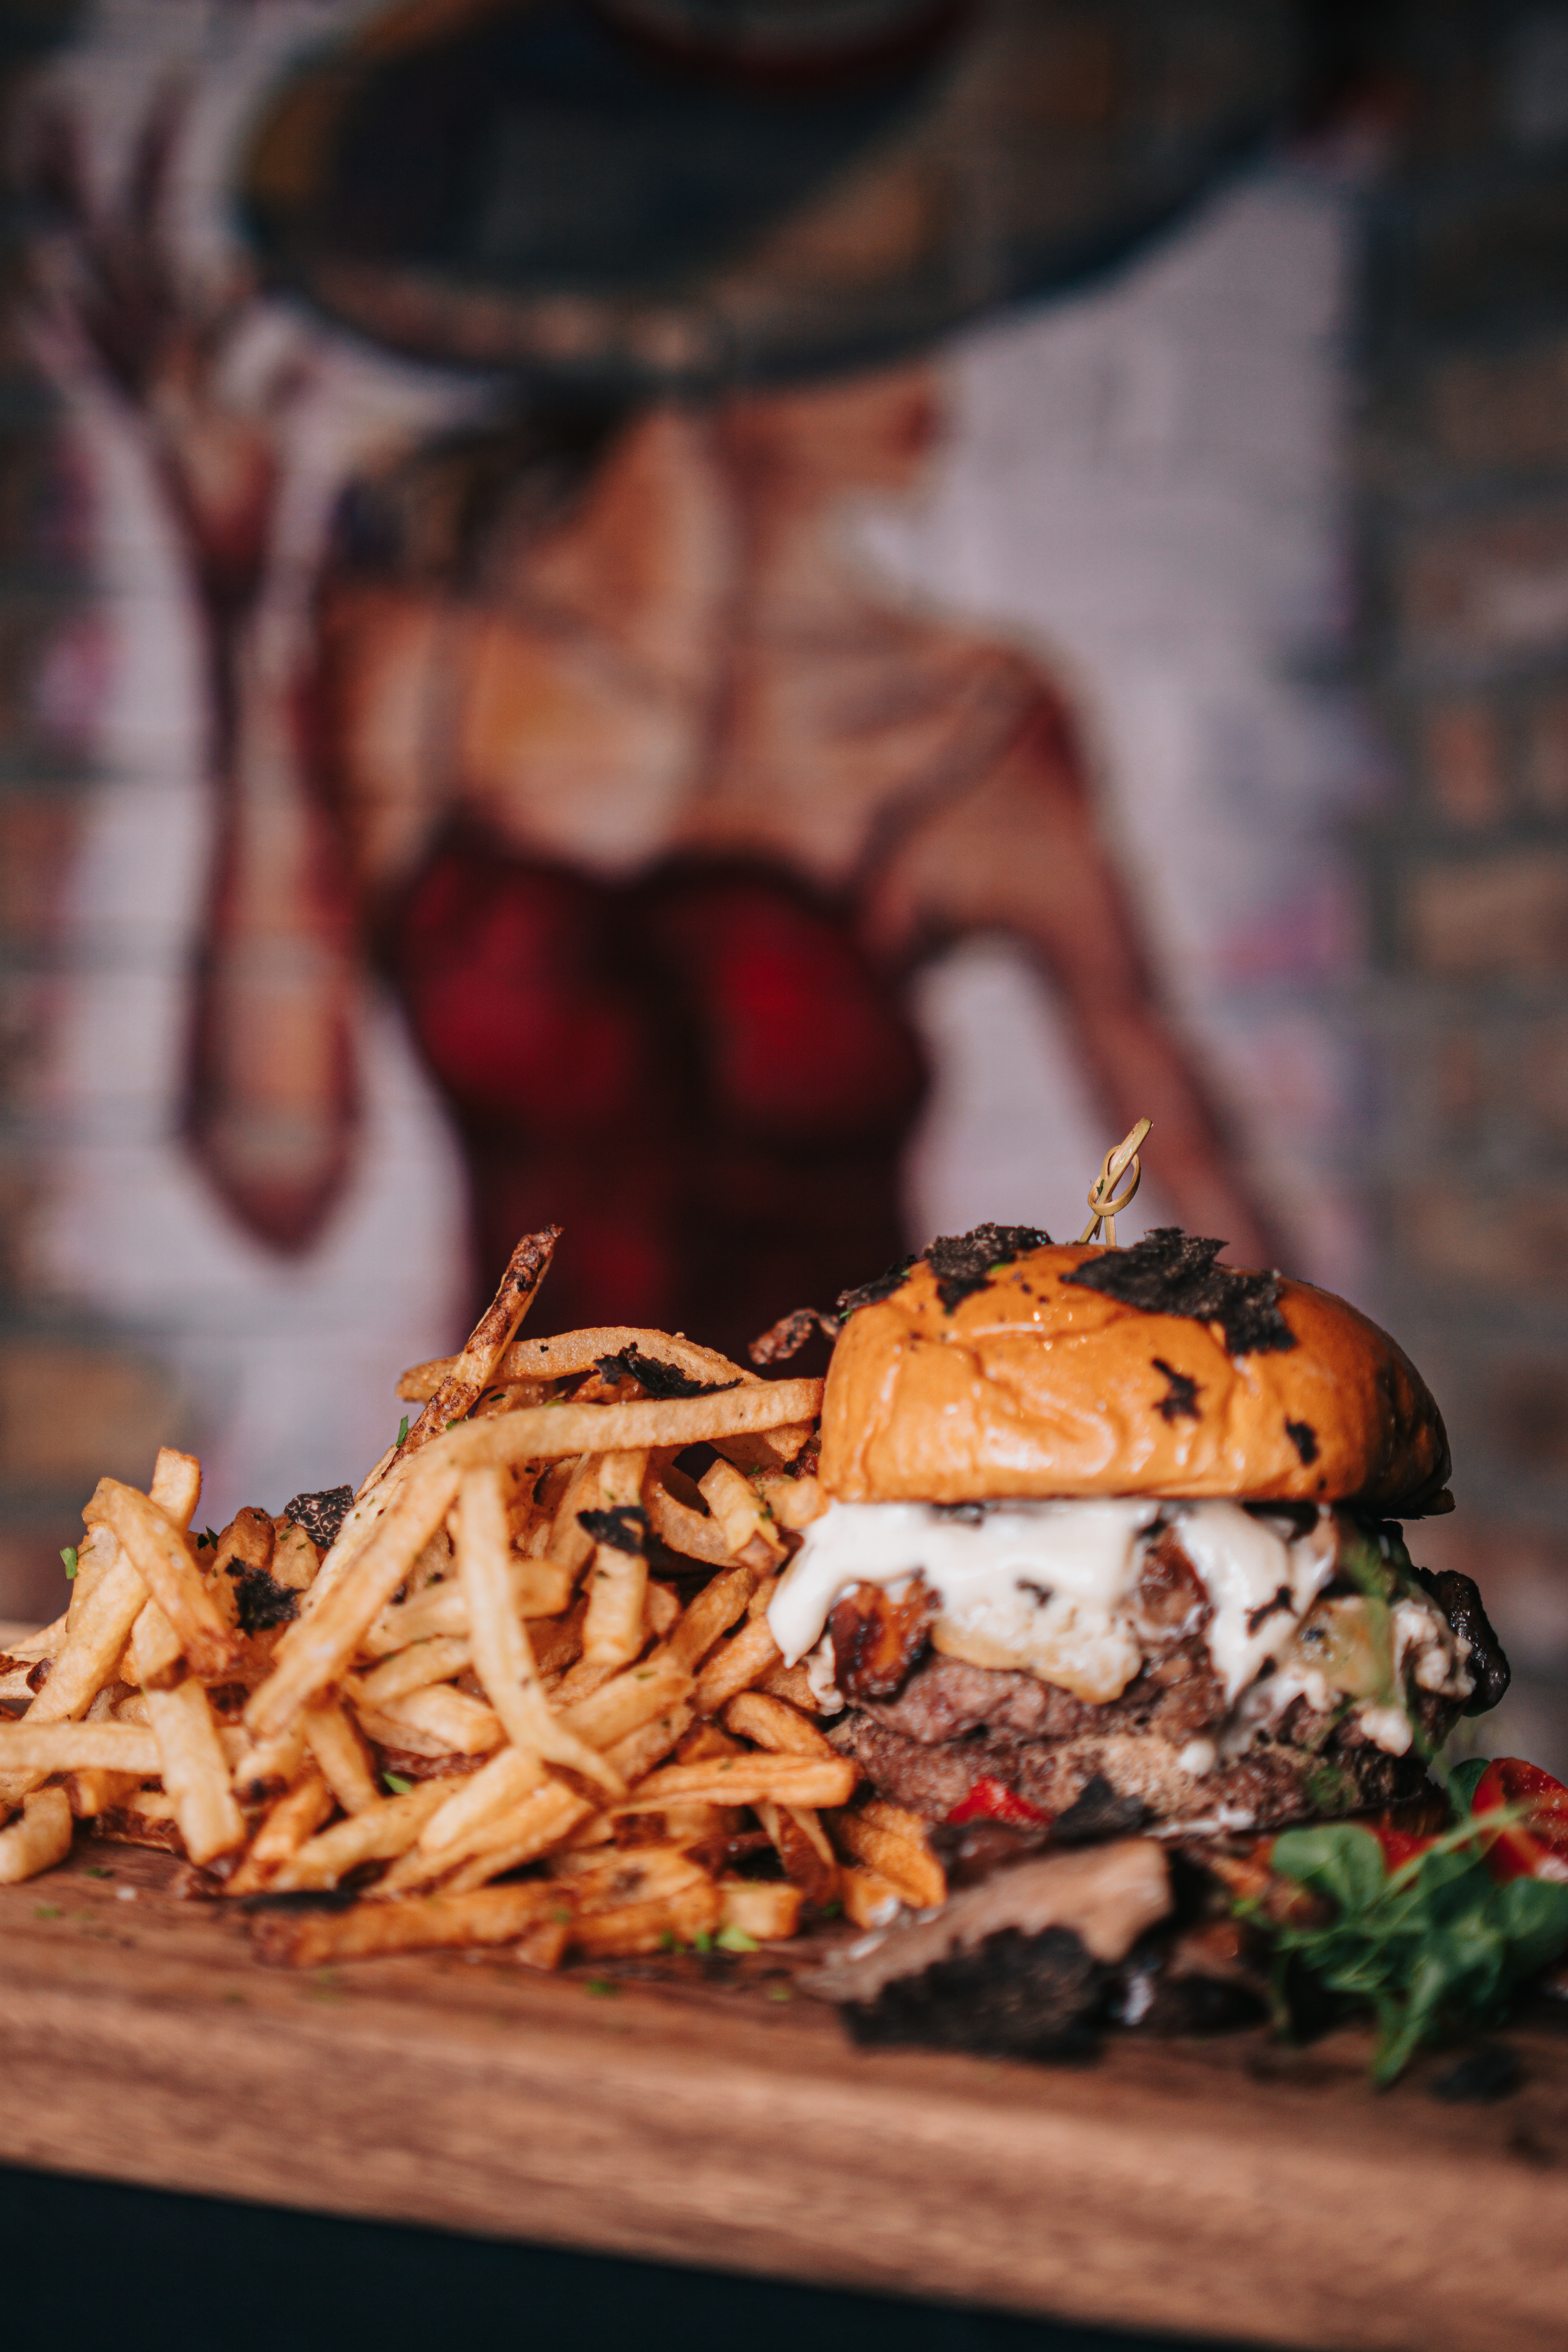 Rosland’s Legacy Burger with a side of fries, with a painting of Rosland in a red dress and hat in the background.